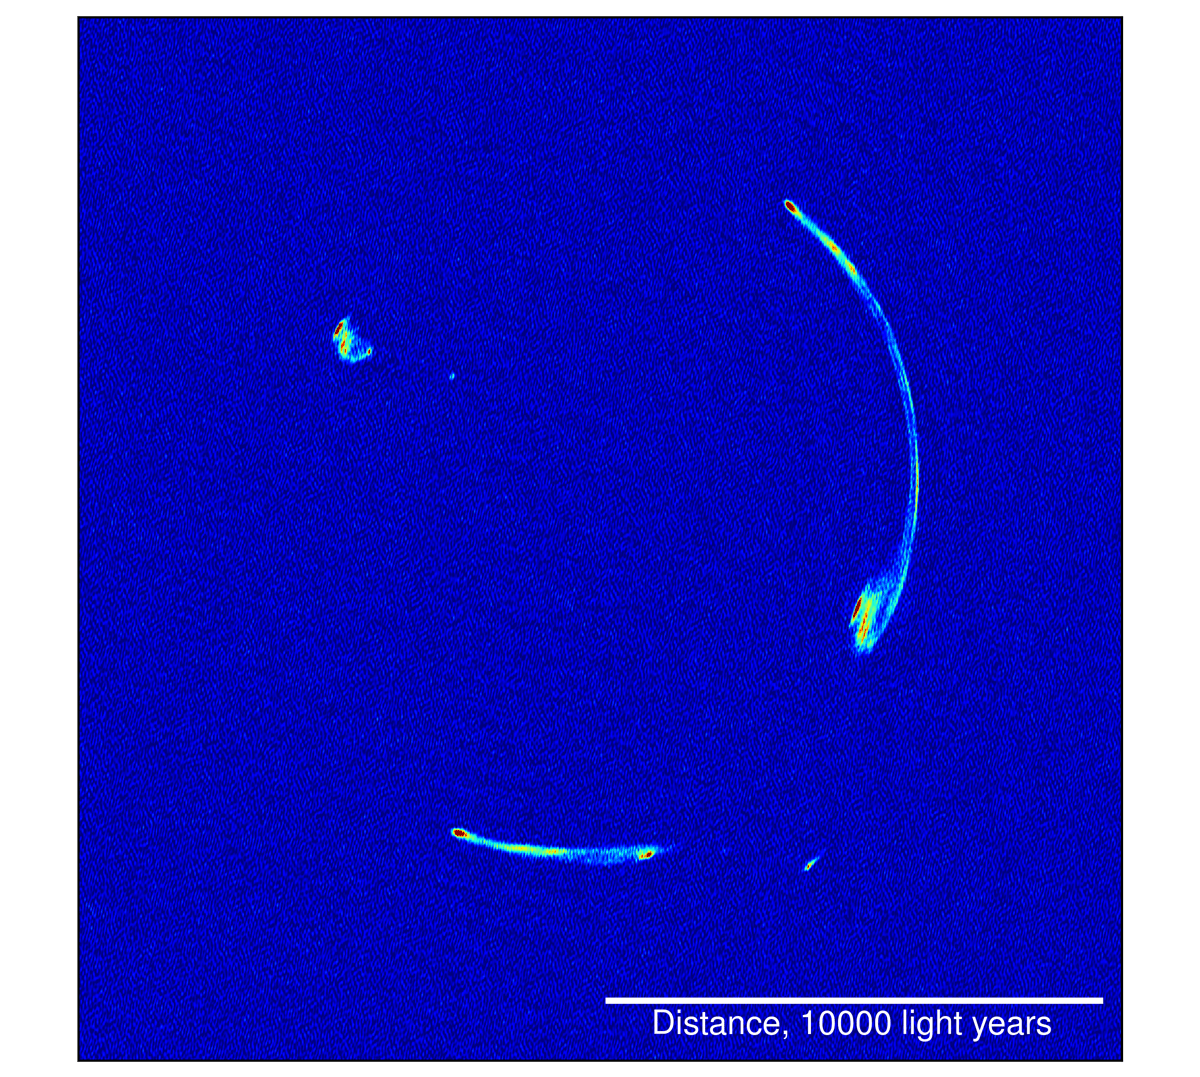 Radio source MG J0751+2716 appearing as arcs due to the gravity distortion of the foreground galaxy. The image was created using a global VLBI telescope array. | Image credit: C. Spingola (Kapteyn Astronomical Institute)